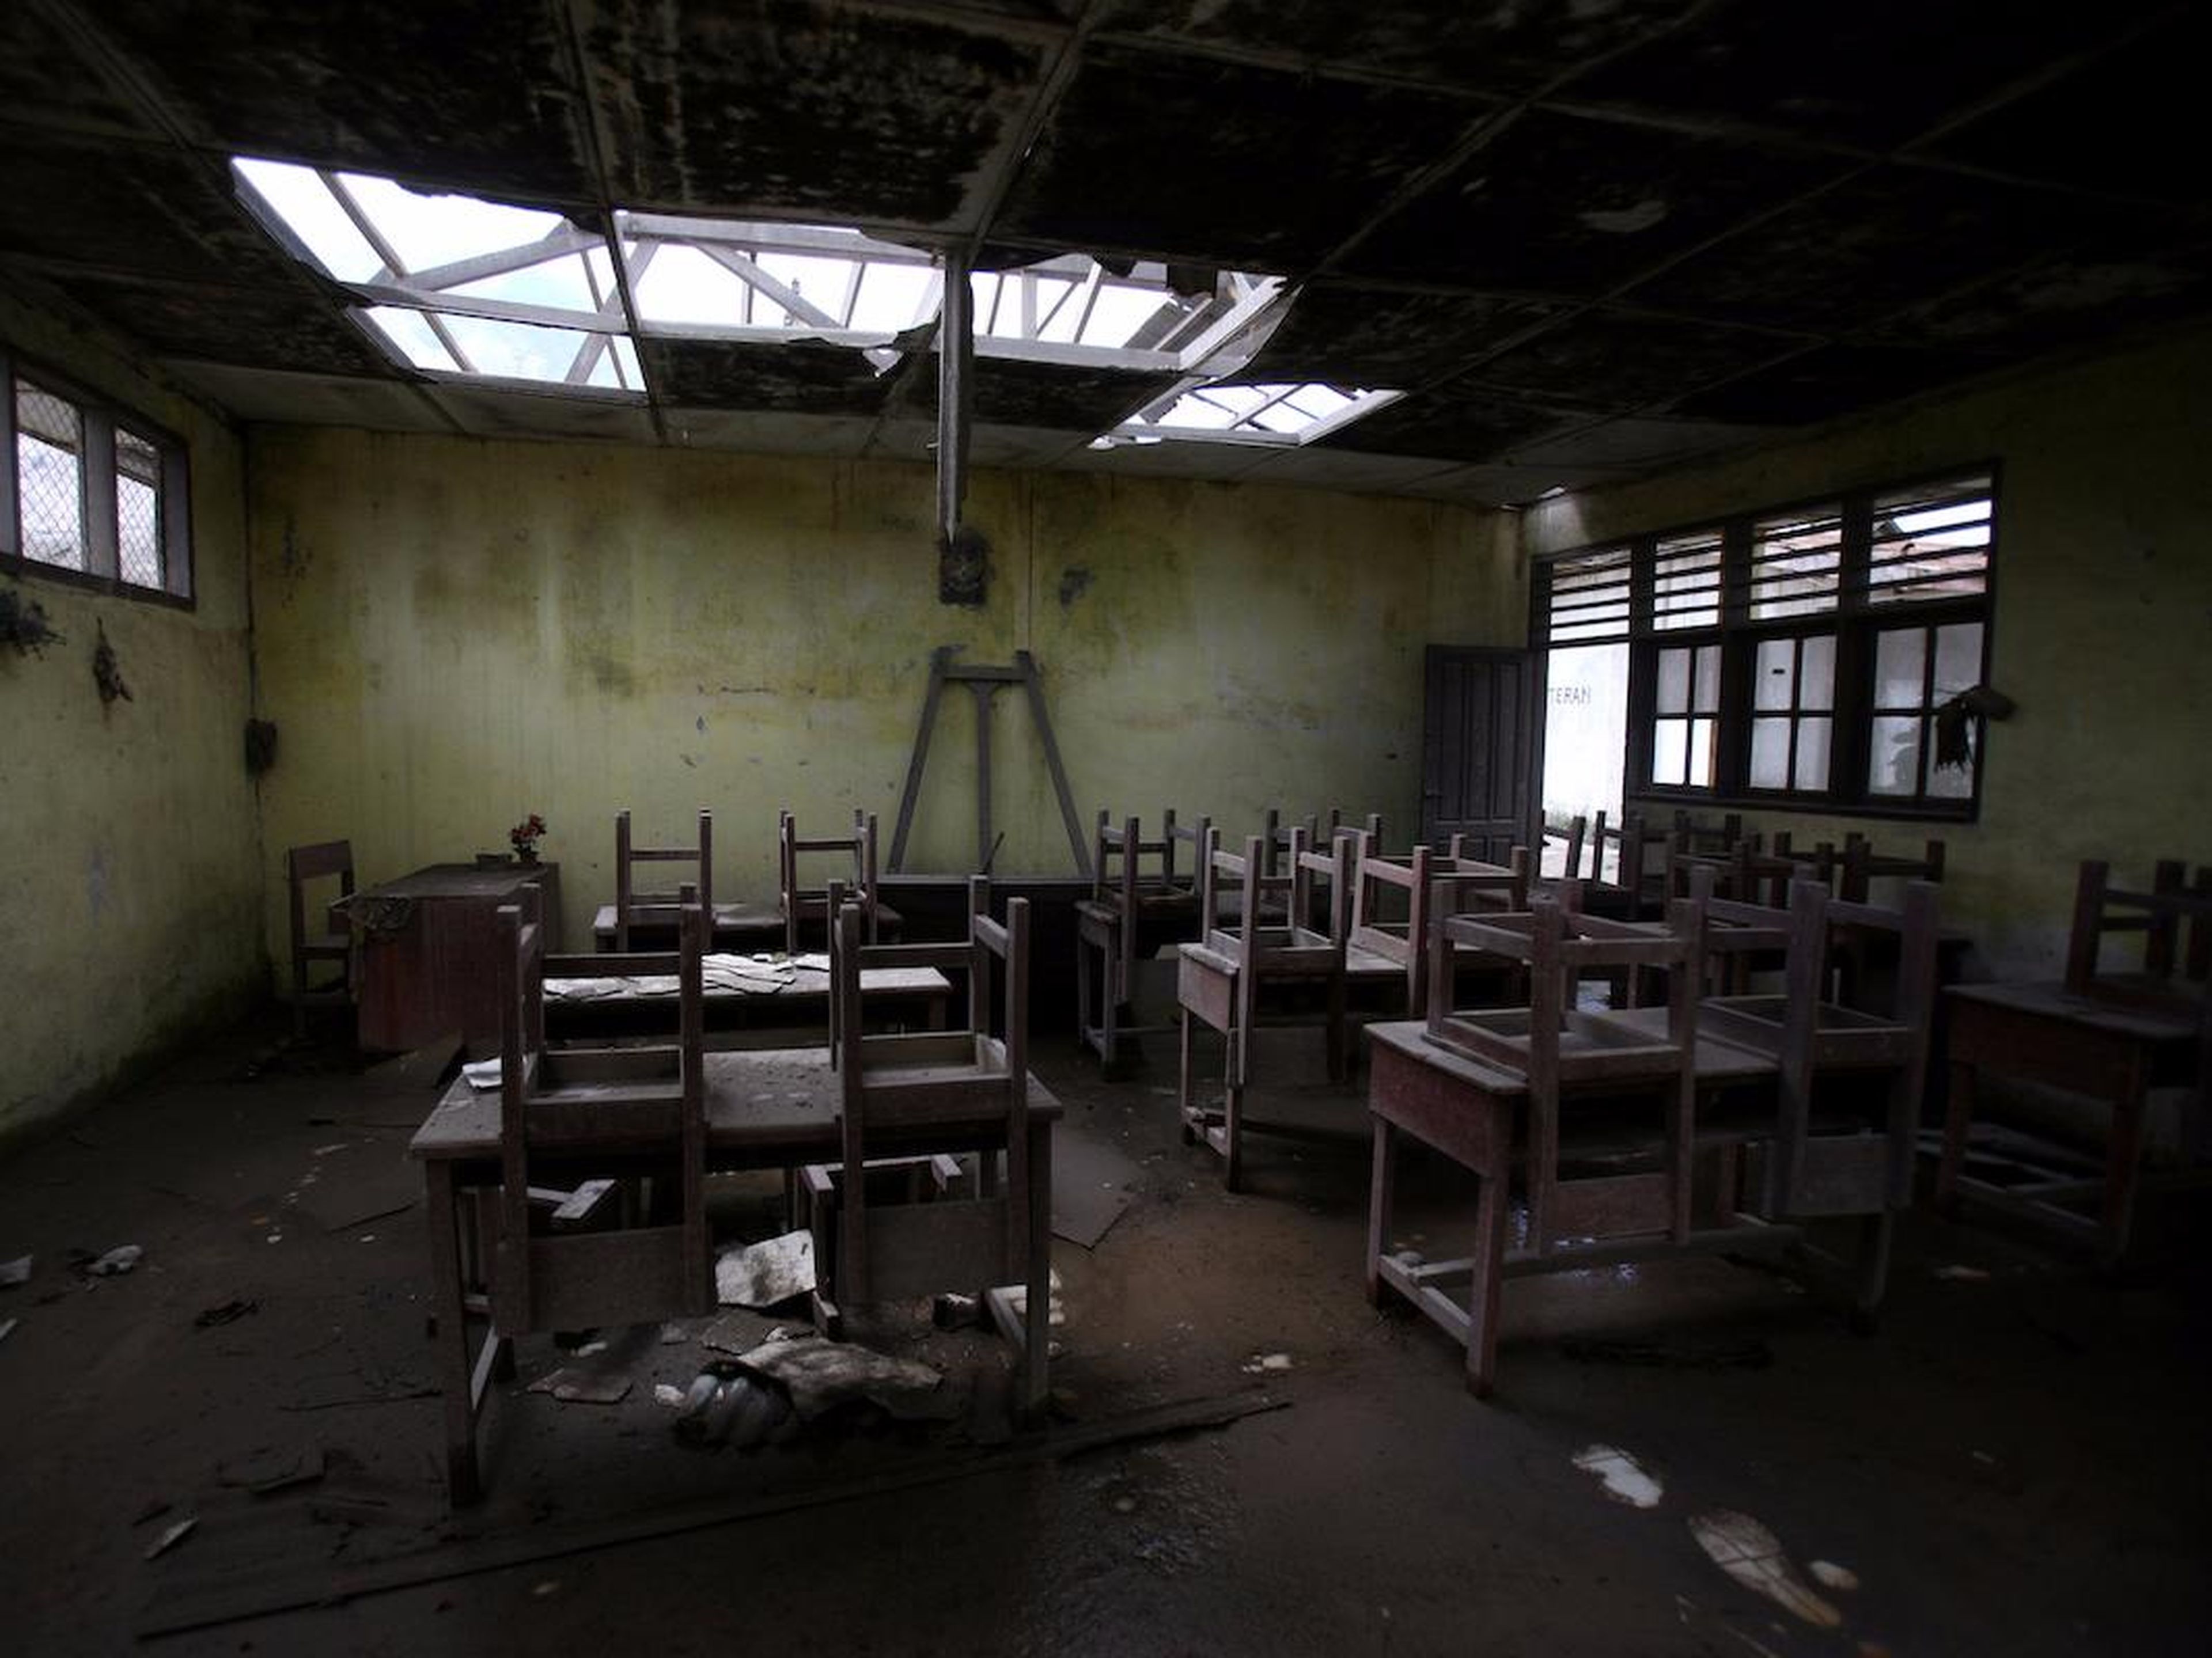 An abandoned classroom in Simacem, Indonesia.